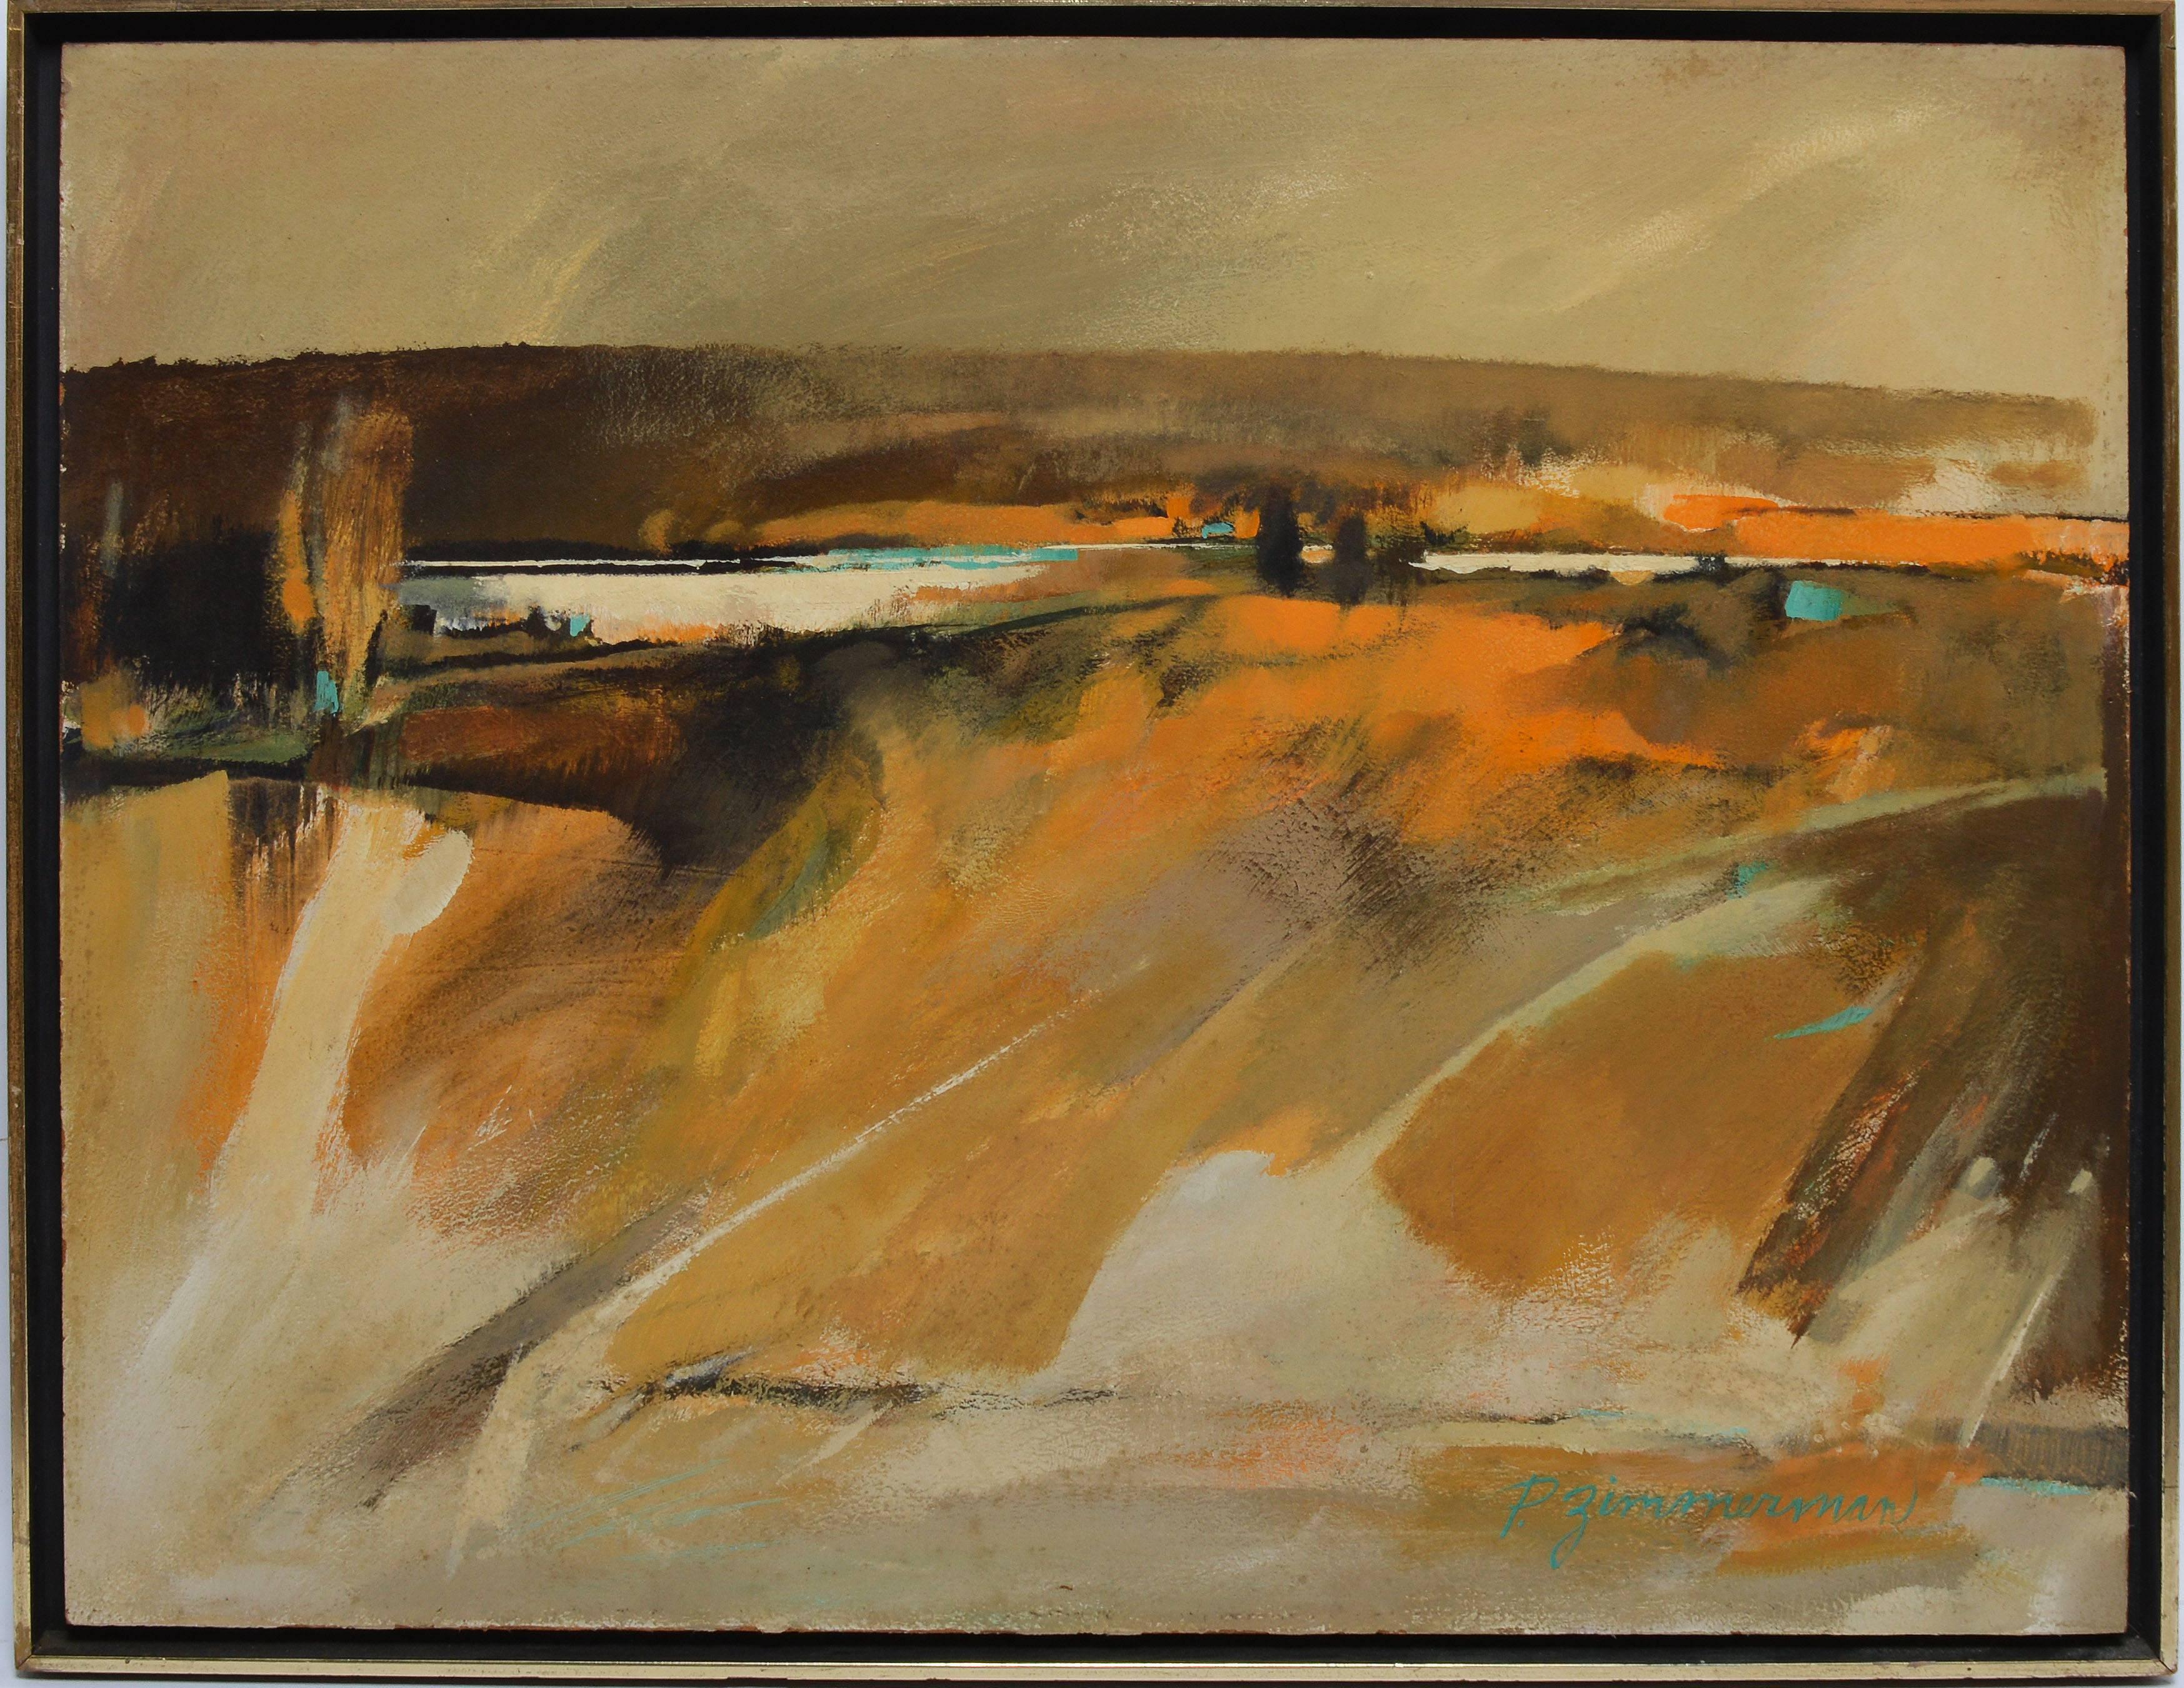 Modernist sunset river landscape view by Paul Zimmerman  (1921 - 2007).  Oil on board, circa 1950.  Signed lower right "P. Zimmerman".  Displayed in a modernist frame.  Image size, 24"L x 20"H, overall 25"L x 21"H.